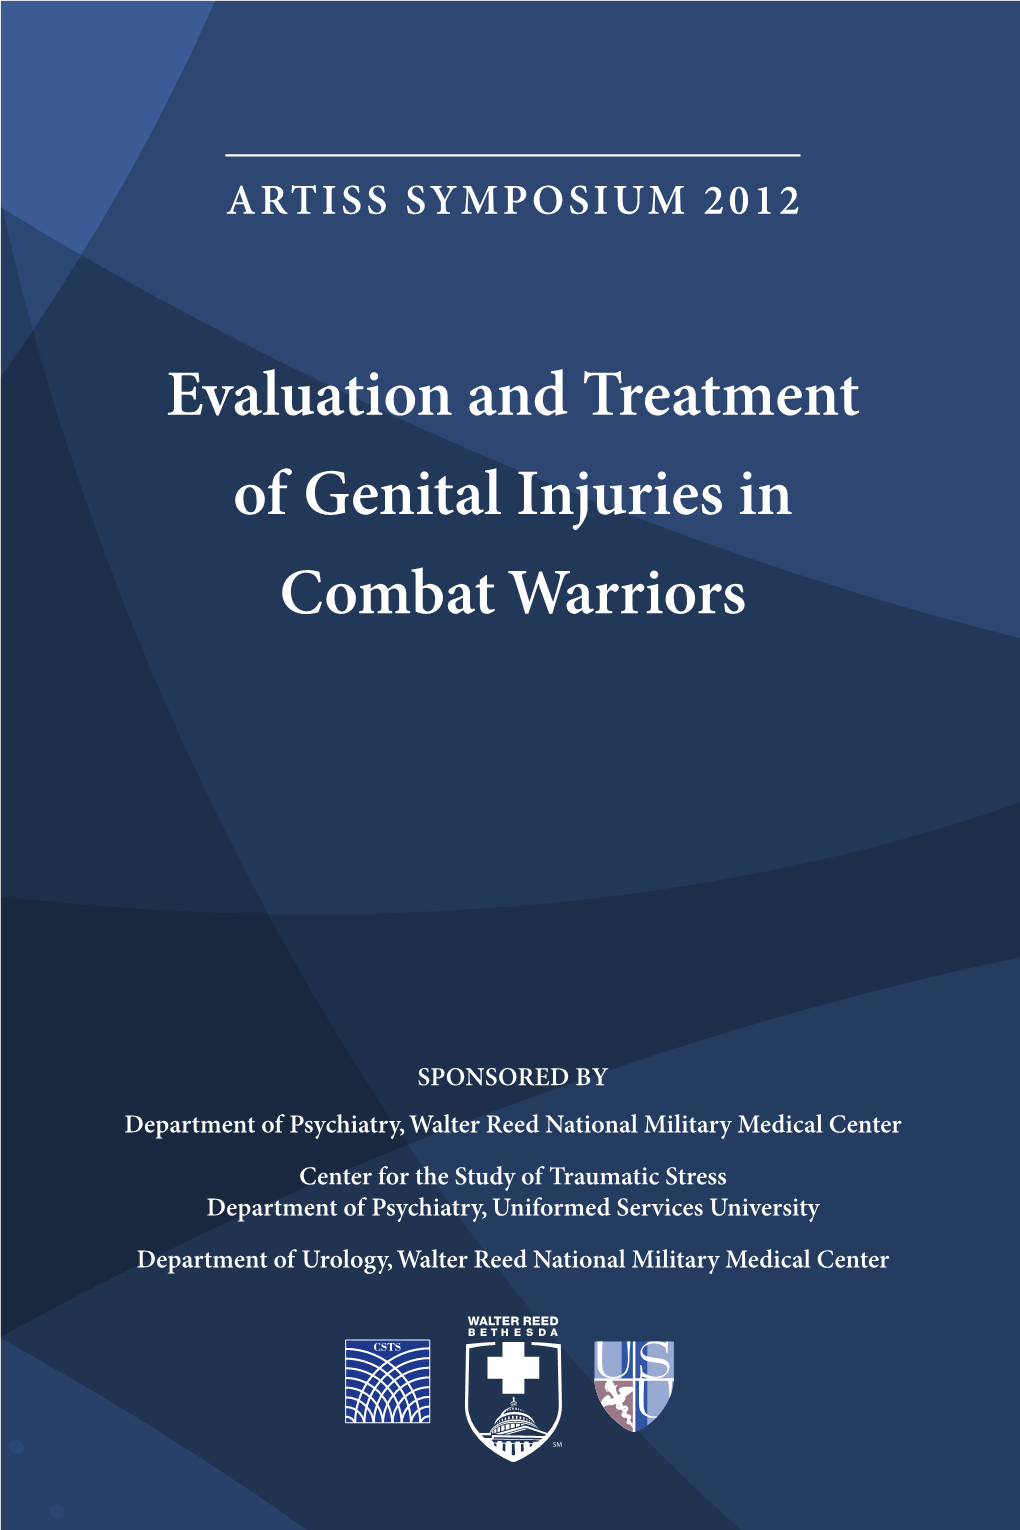 Evaluation and Treatment of Genital Injuries in Combat Warriors